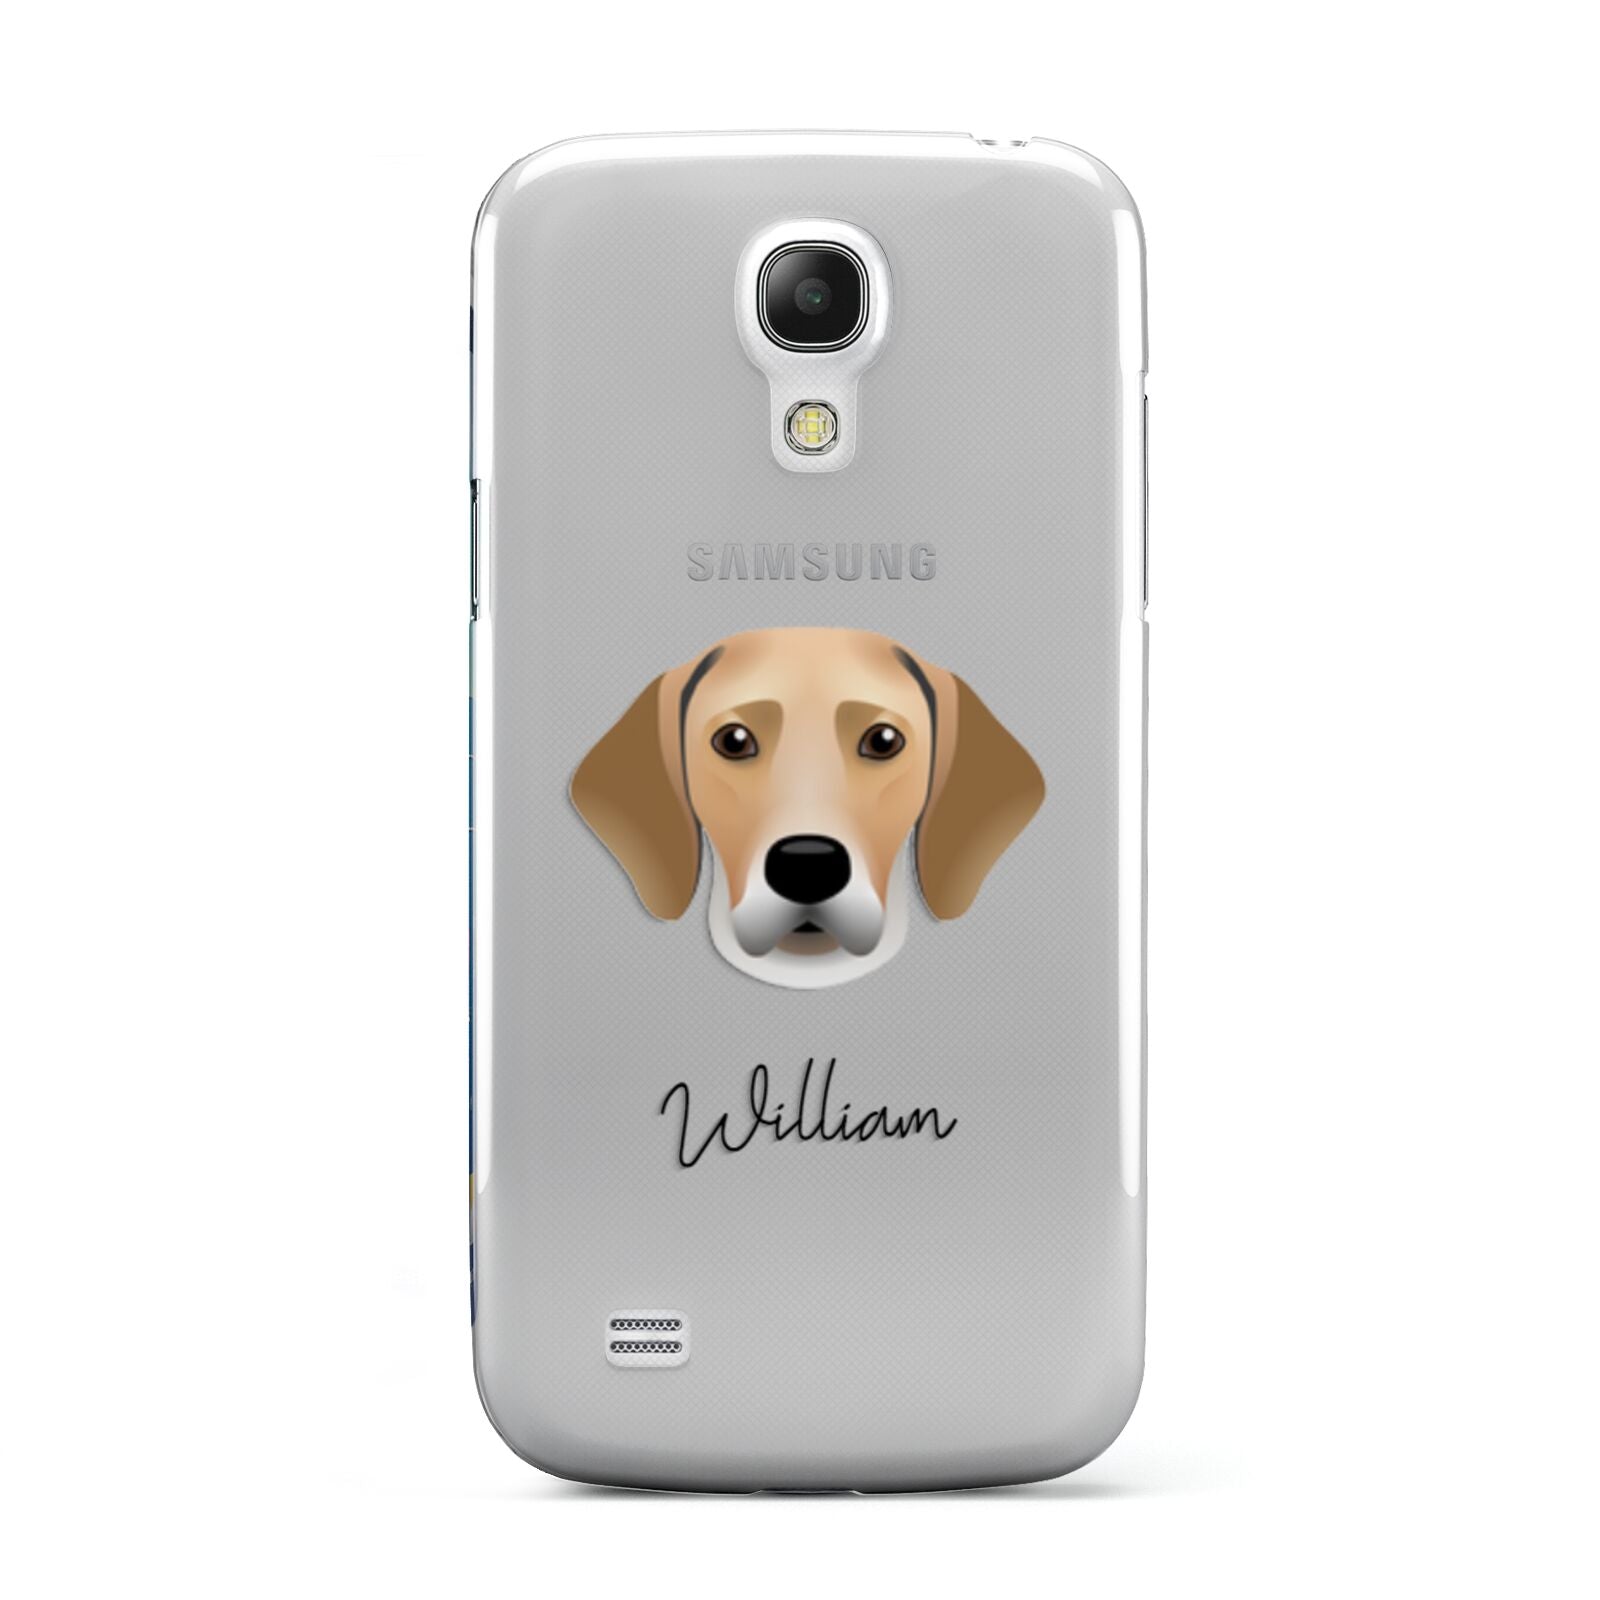 Harrier Personalised Samsung Galaxy S4 Mini Case